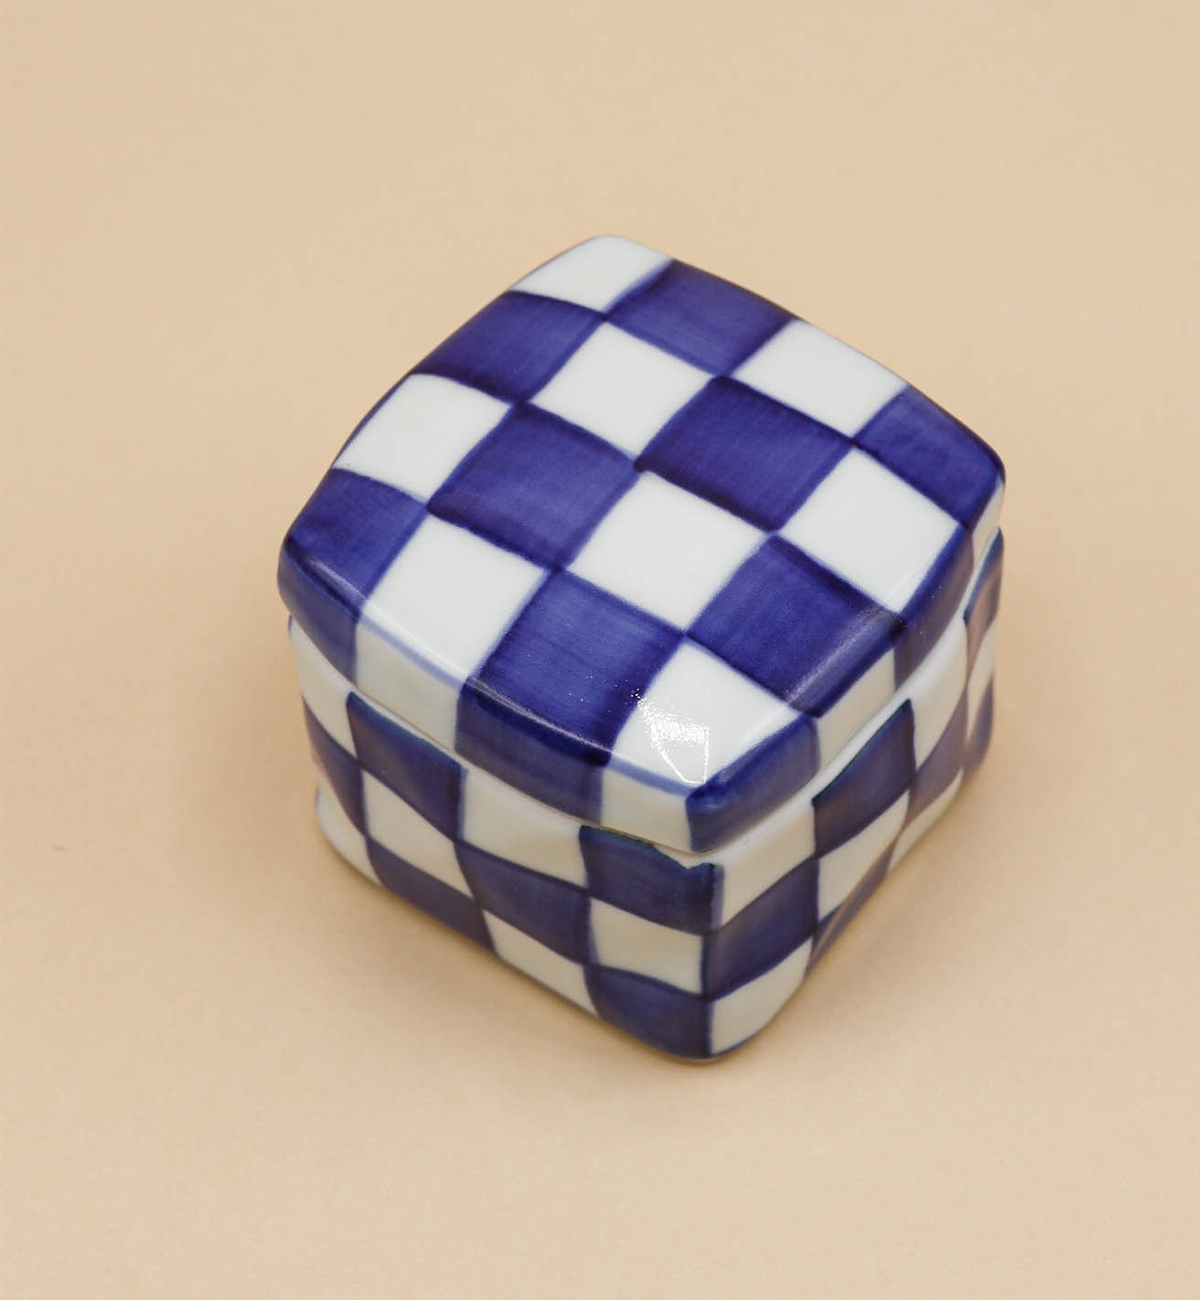 Square Jar with checkered lid in white and dark blue